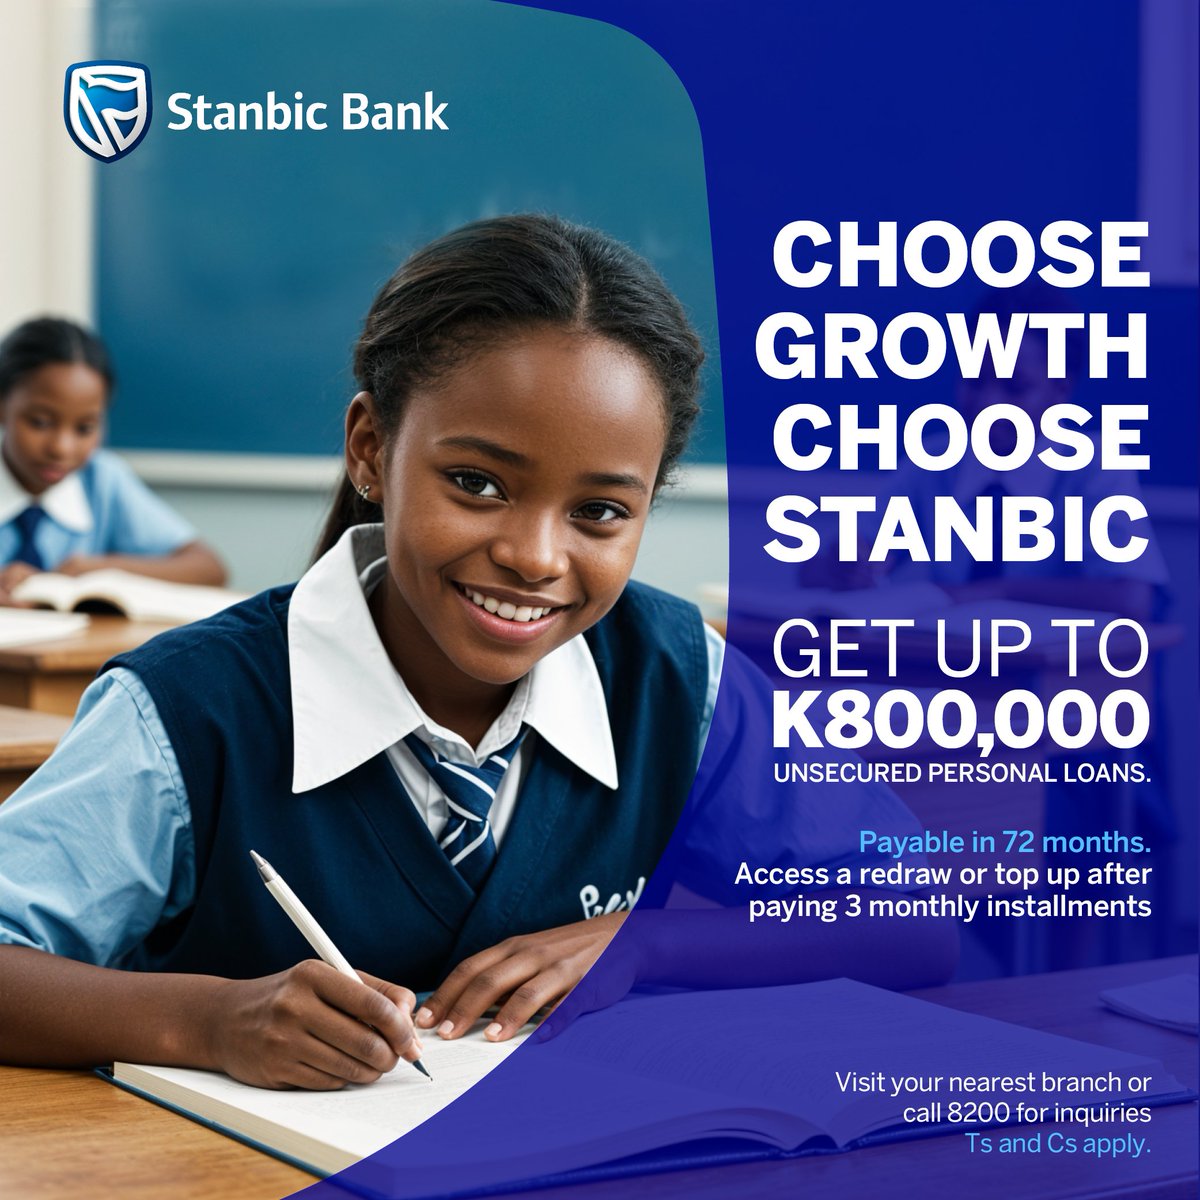 Parents, get ready for back-to-school stress-free! Apply for Stanbic's Unsecured Loan of up to K800,000 without any security or collateral. Pay it back over 72 months at your own pace. Call 8200 or visit your nearest branch to make it happen! #StanbicUnsecuredLoan